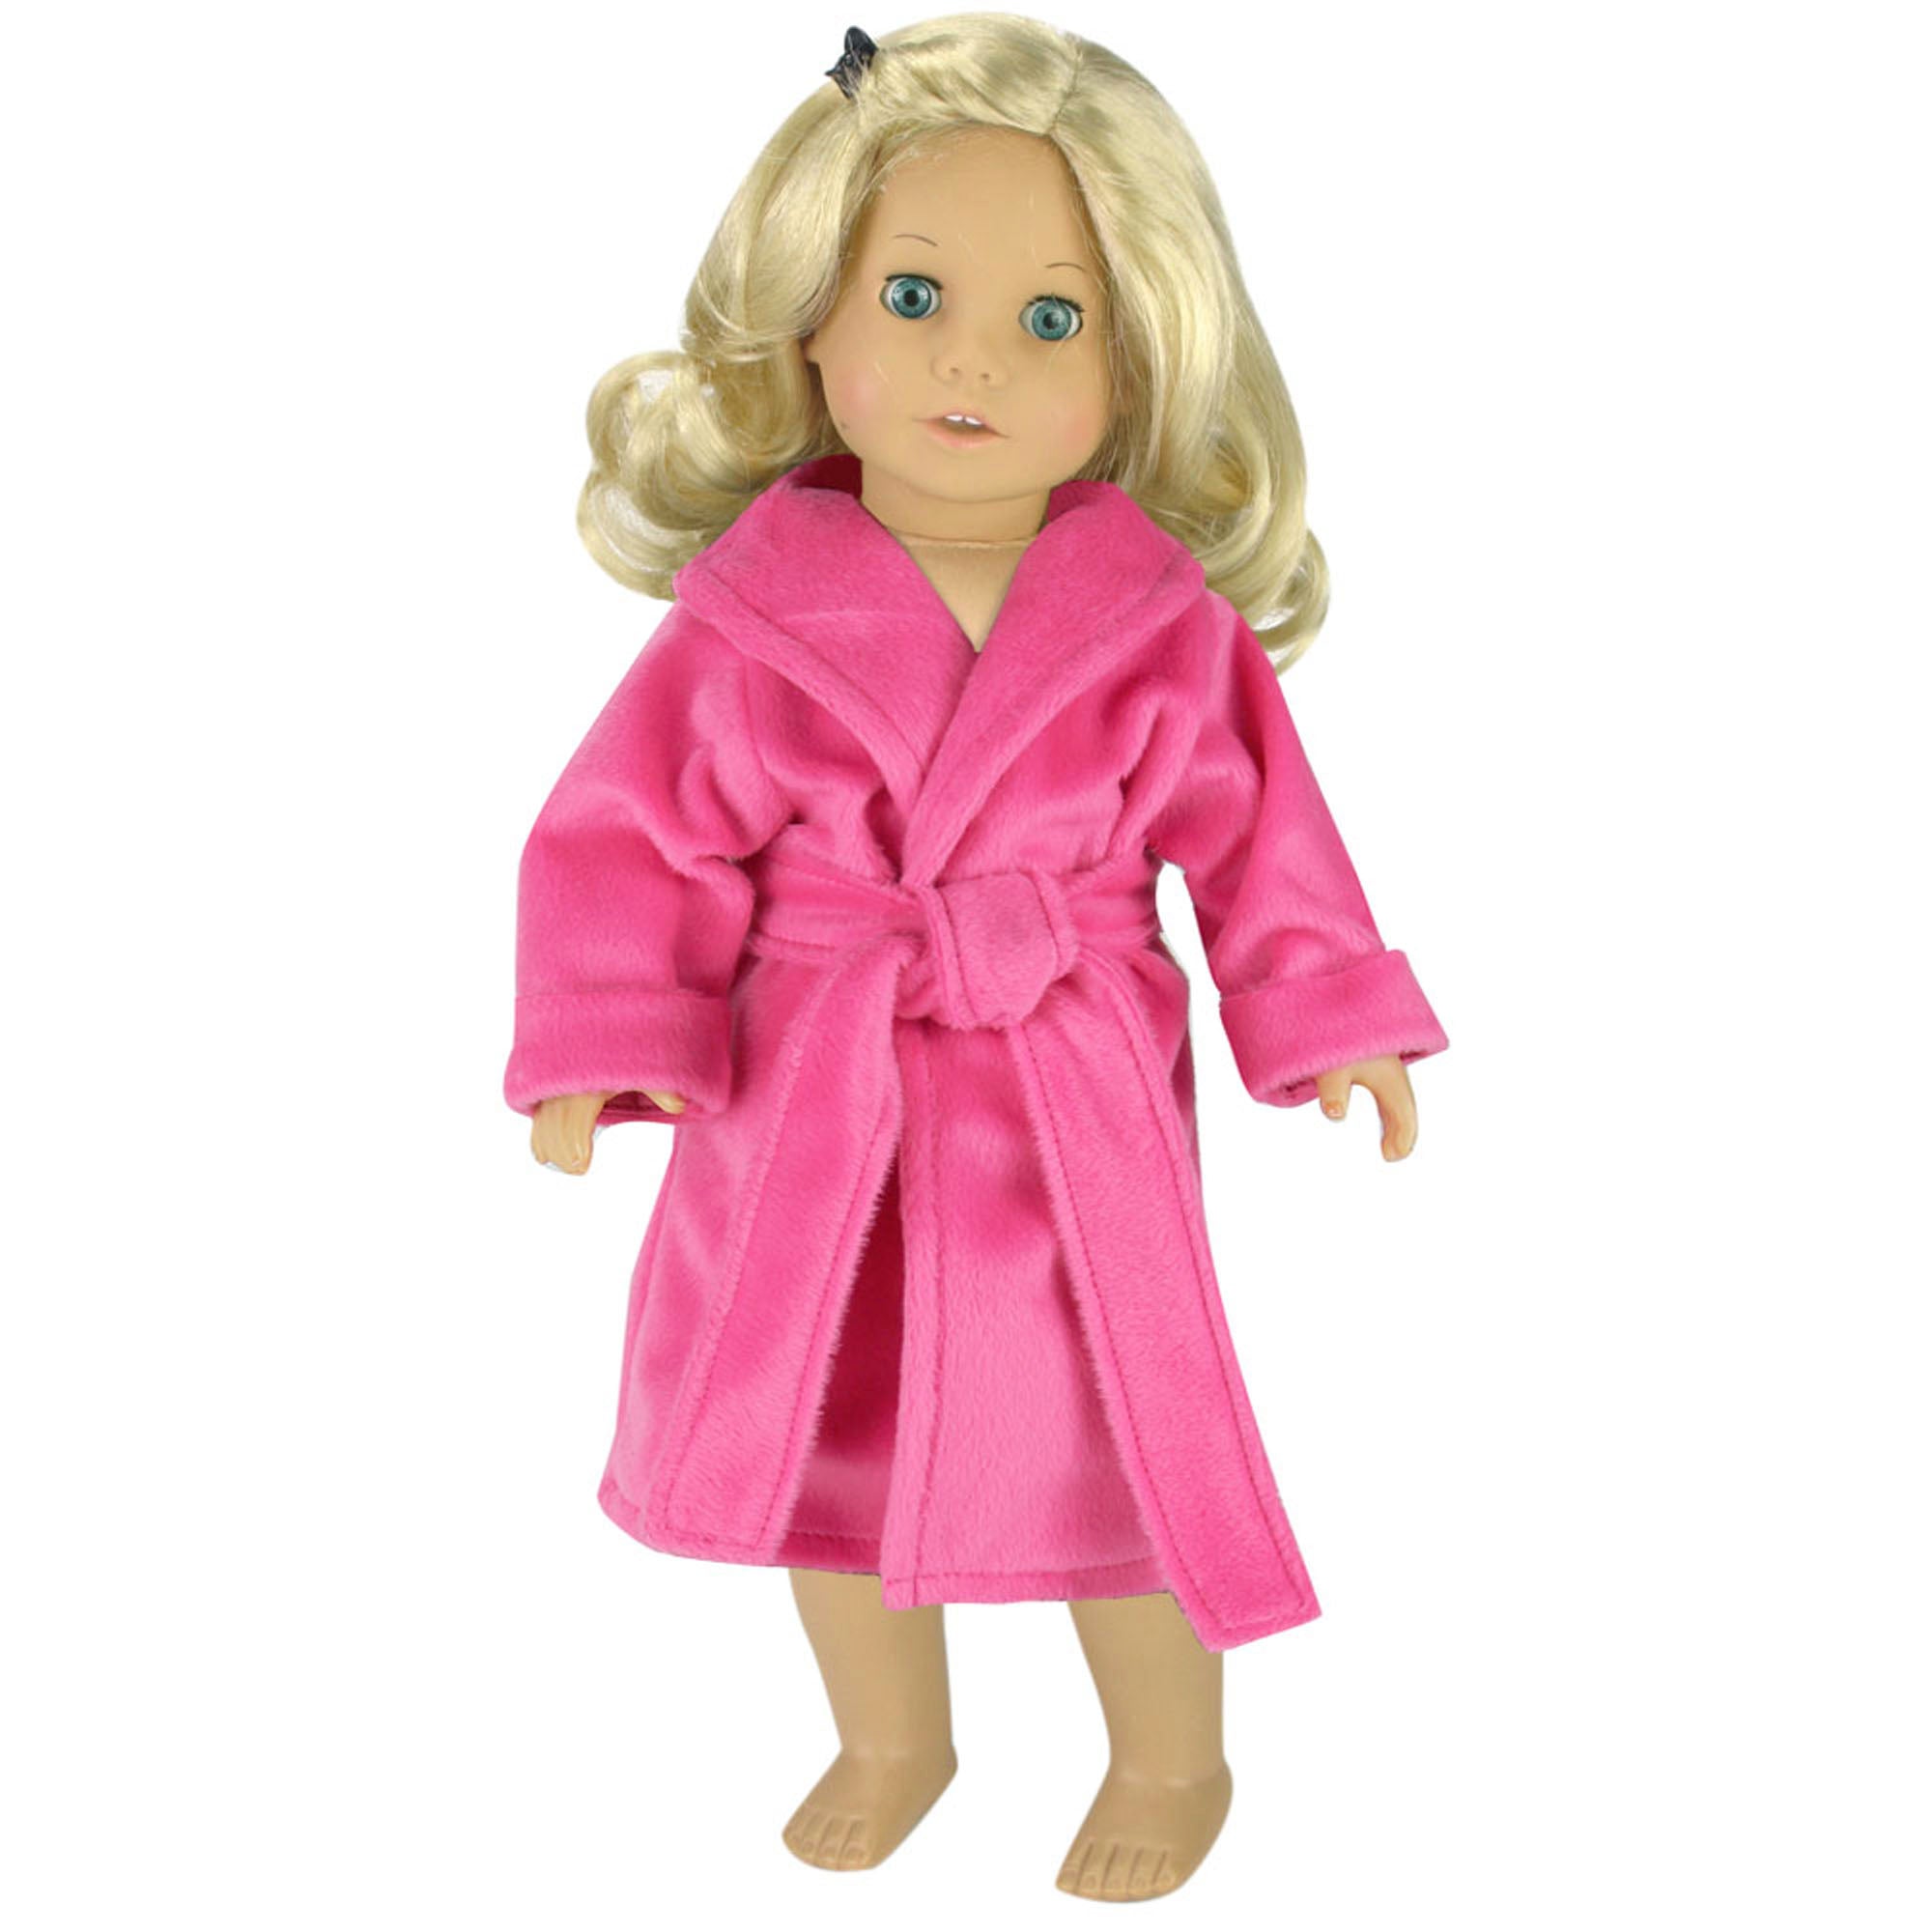 Sophia’s Luxuriously Soft Velour Spa Day Solid-Colored Bathrobe for 18” Dolls, Hot Pink